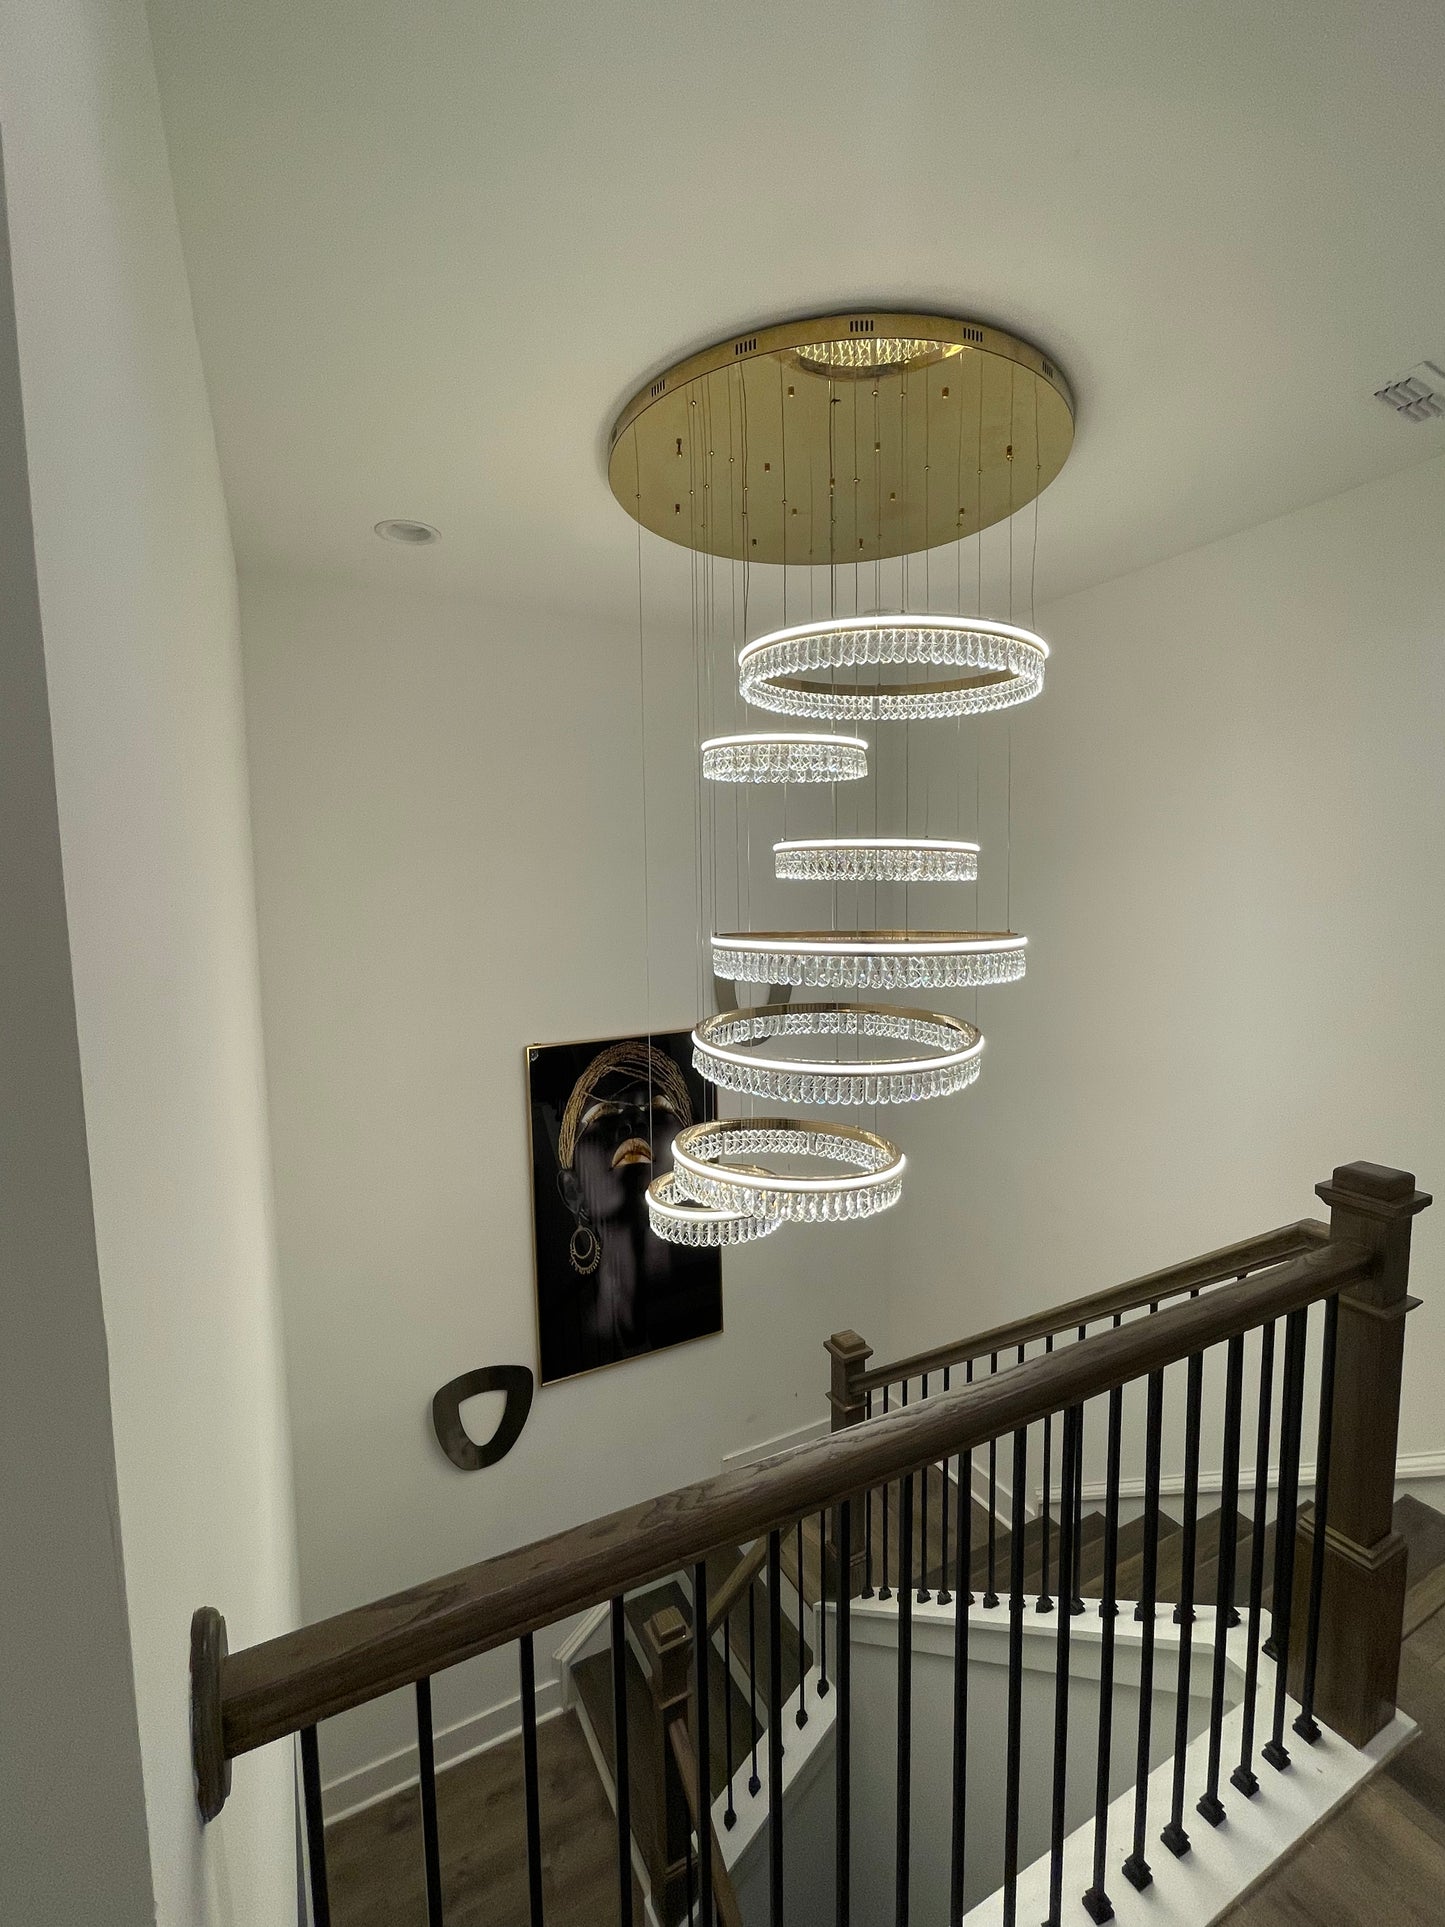 7 Level Cyclone Chandelier